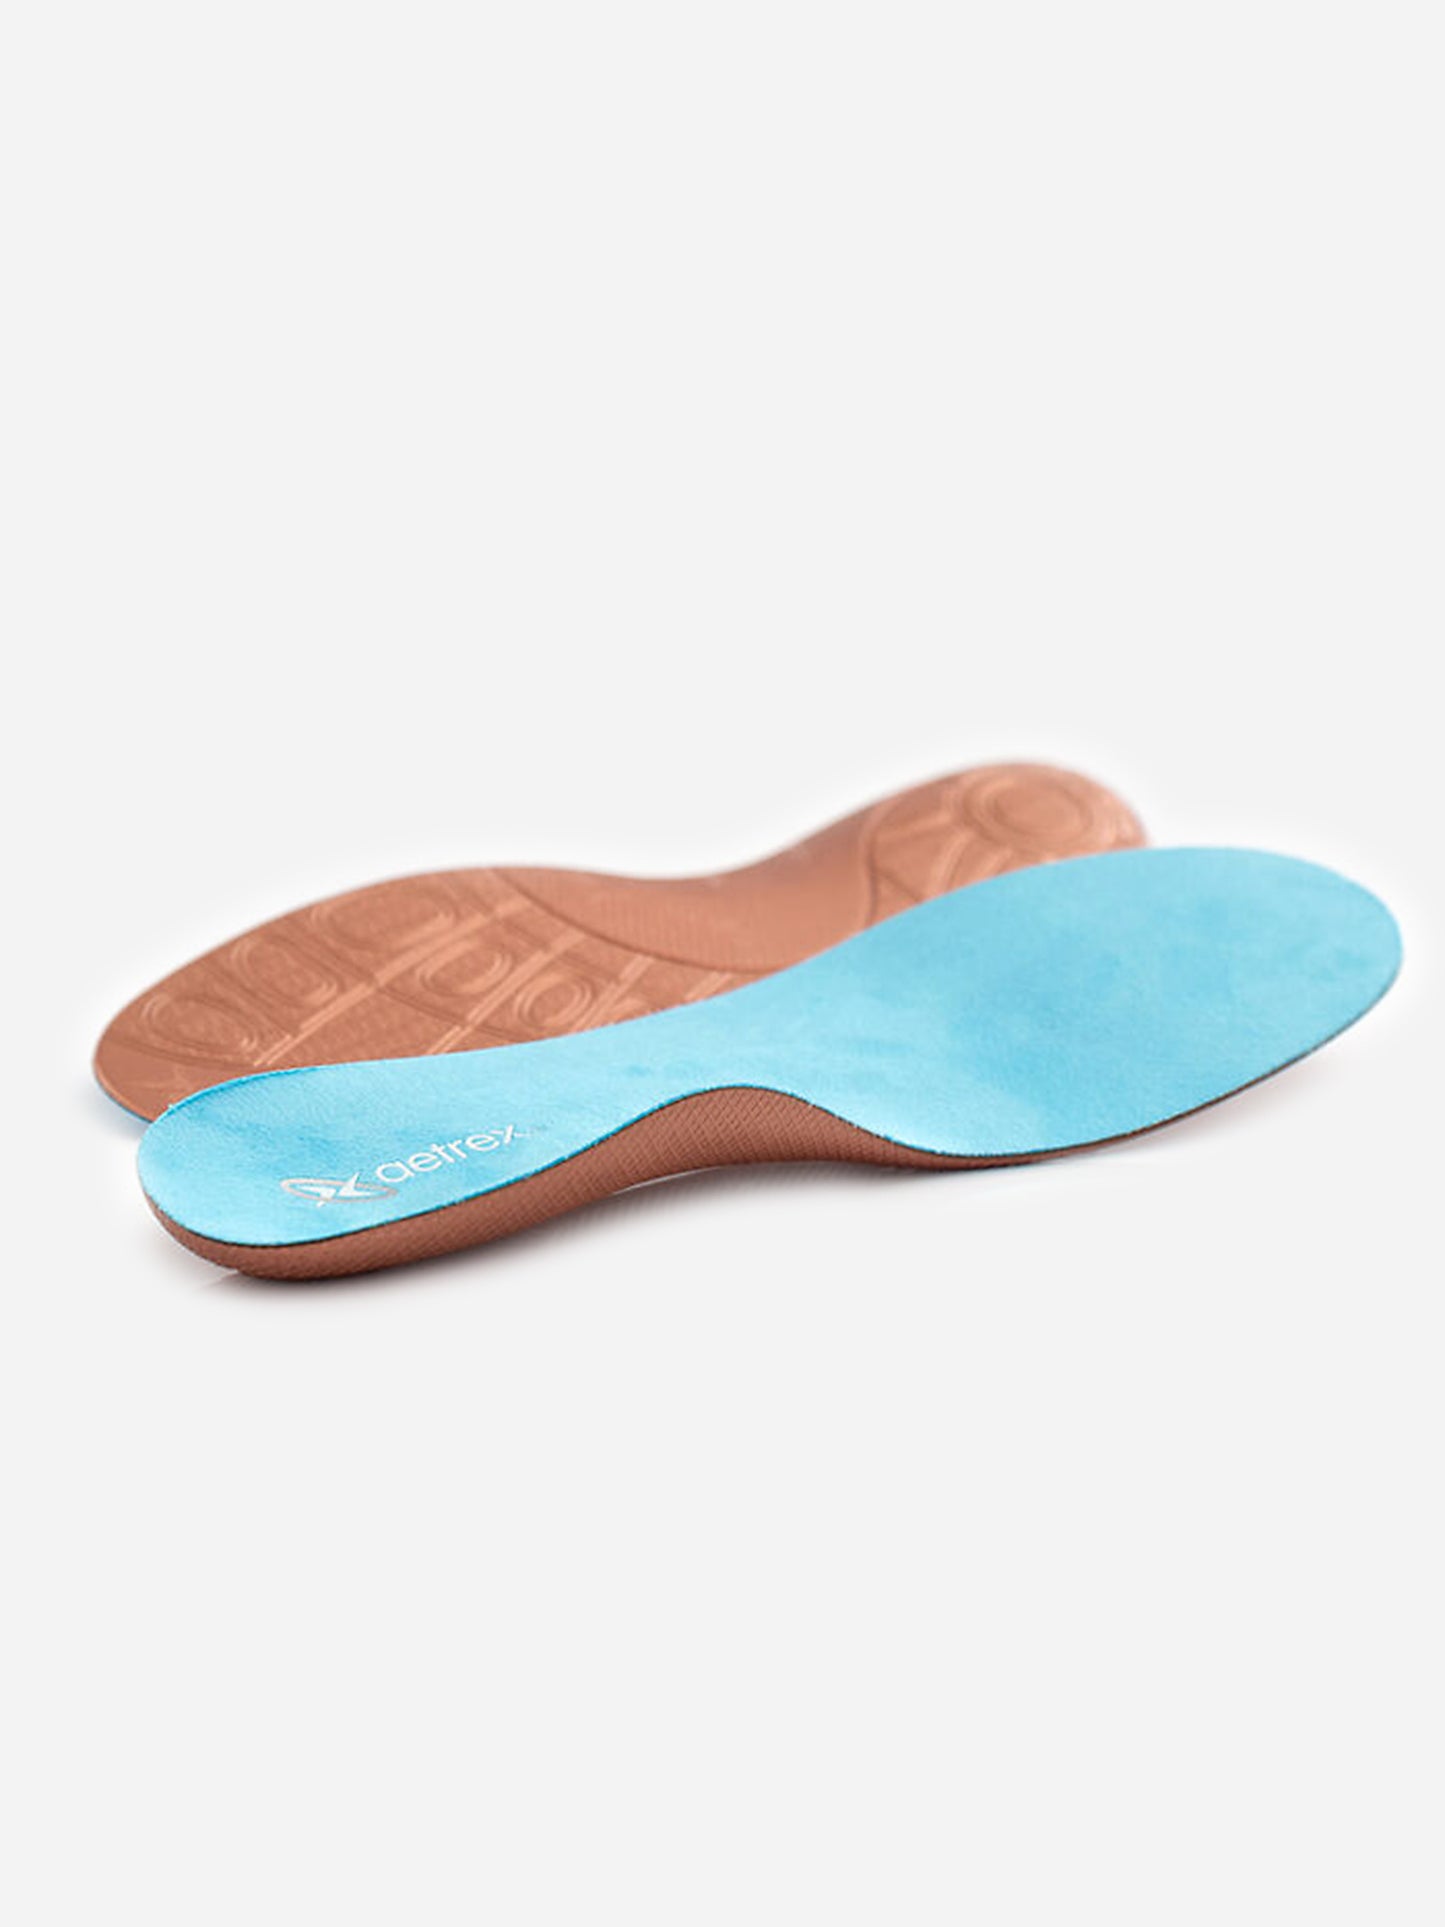 Aetrex Thinsoles Posted Orthotics Insole